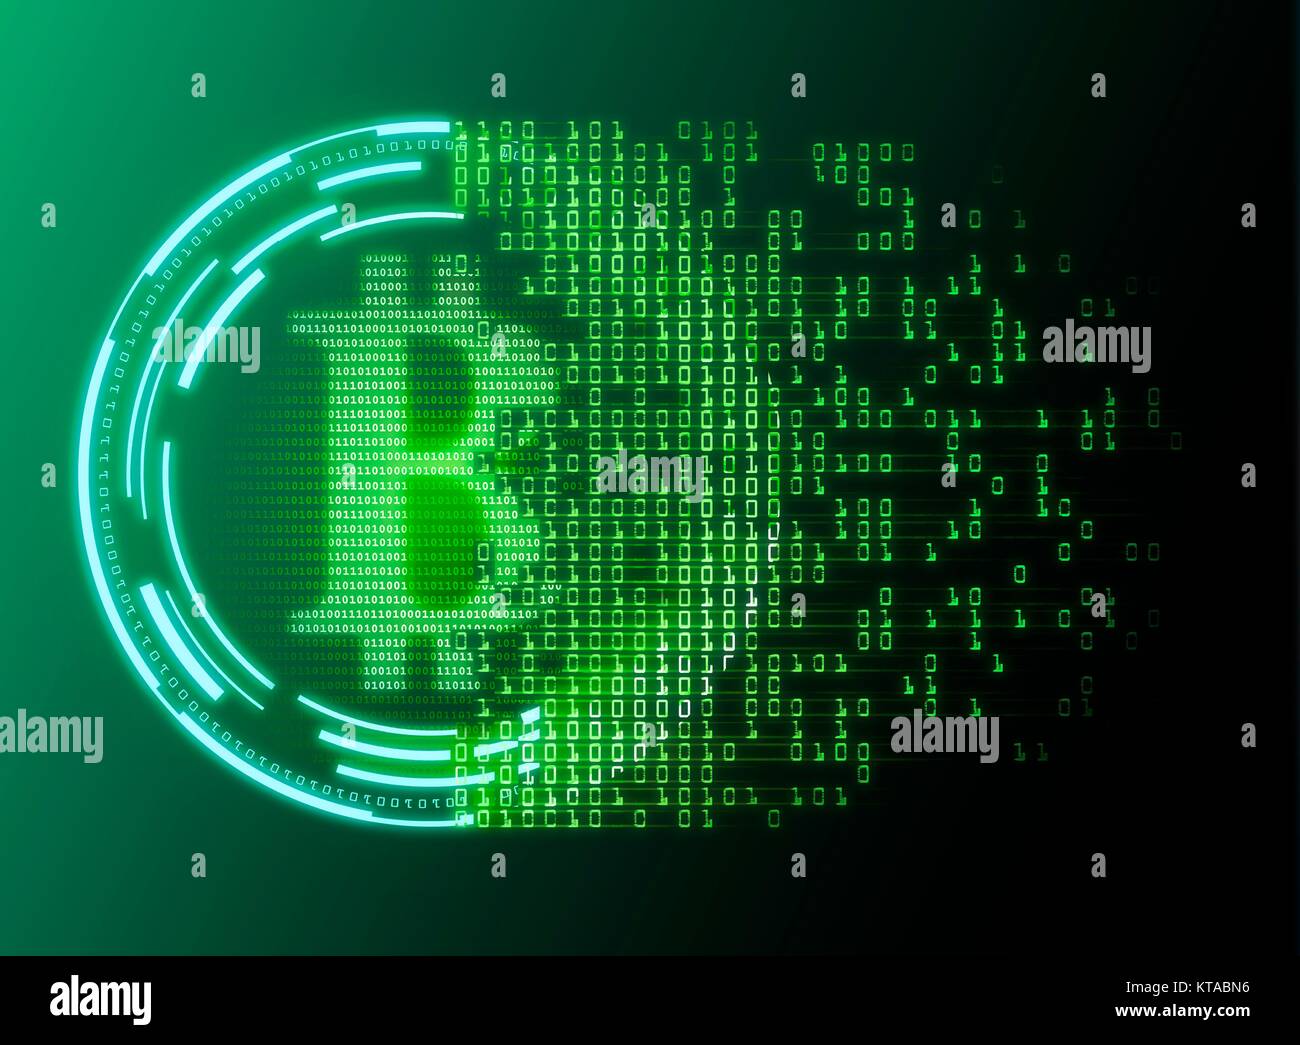 Conceptual artwork representing the bitcoin cryptocurrency. Bitcoin is a type of digital currency, created in 2009, which operates independently of any bank. Certain vendors now accept Bitcoins as payment of goods or services. Stock Photo